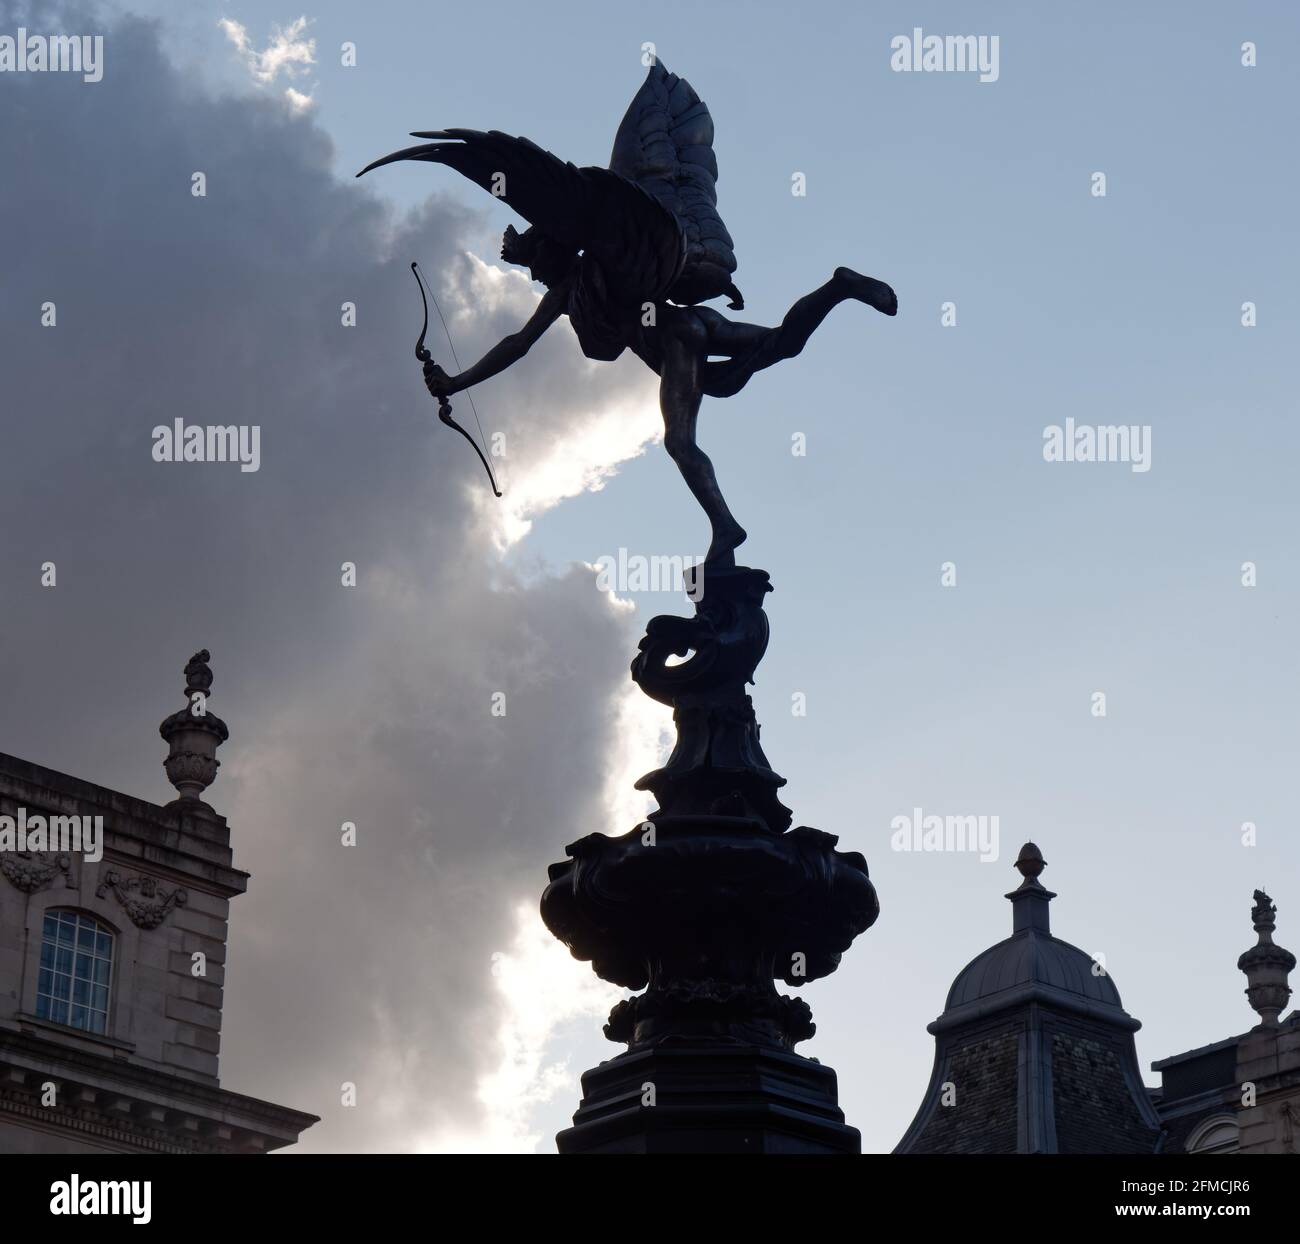 London, Greater London, England - May 04 2021: Statue of Anteros on The Shaftesbury Memorial Fountain often mistakenly called "Eros" Stock Photo